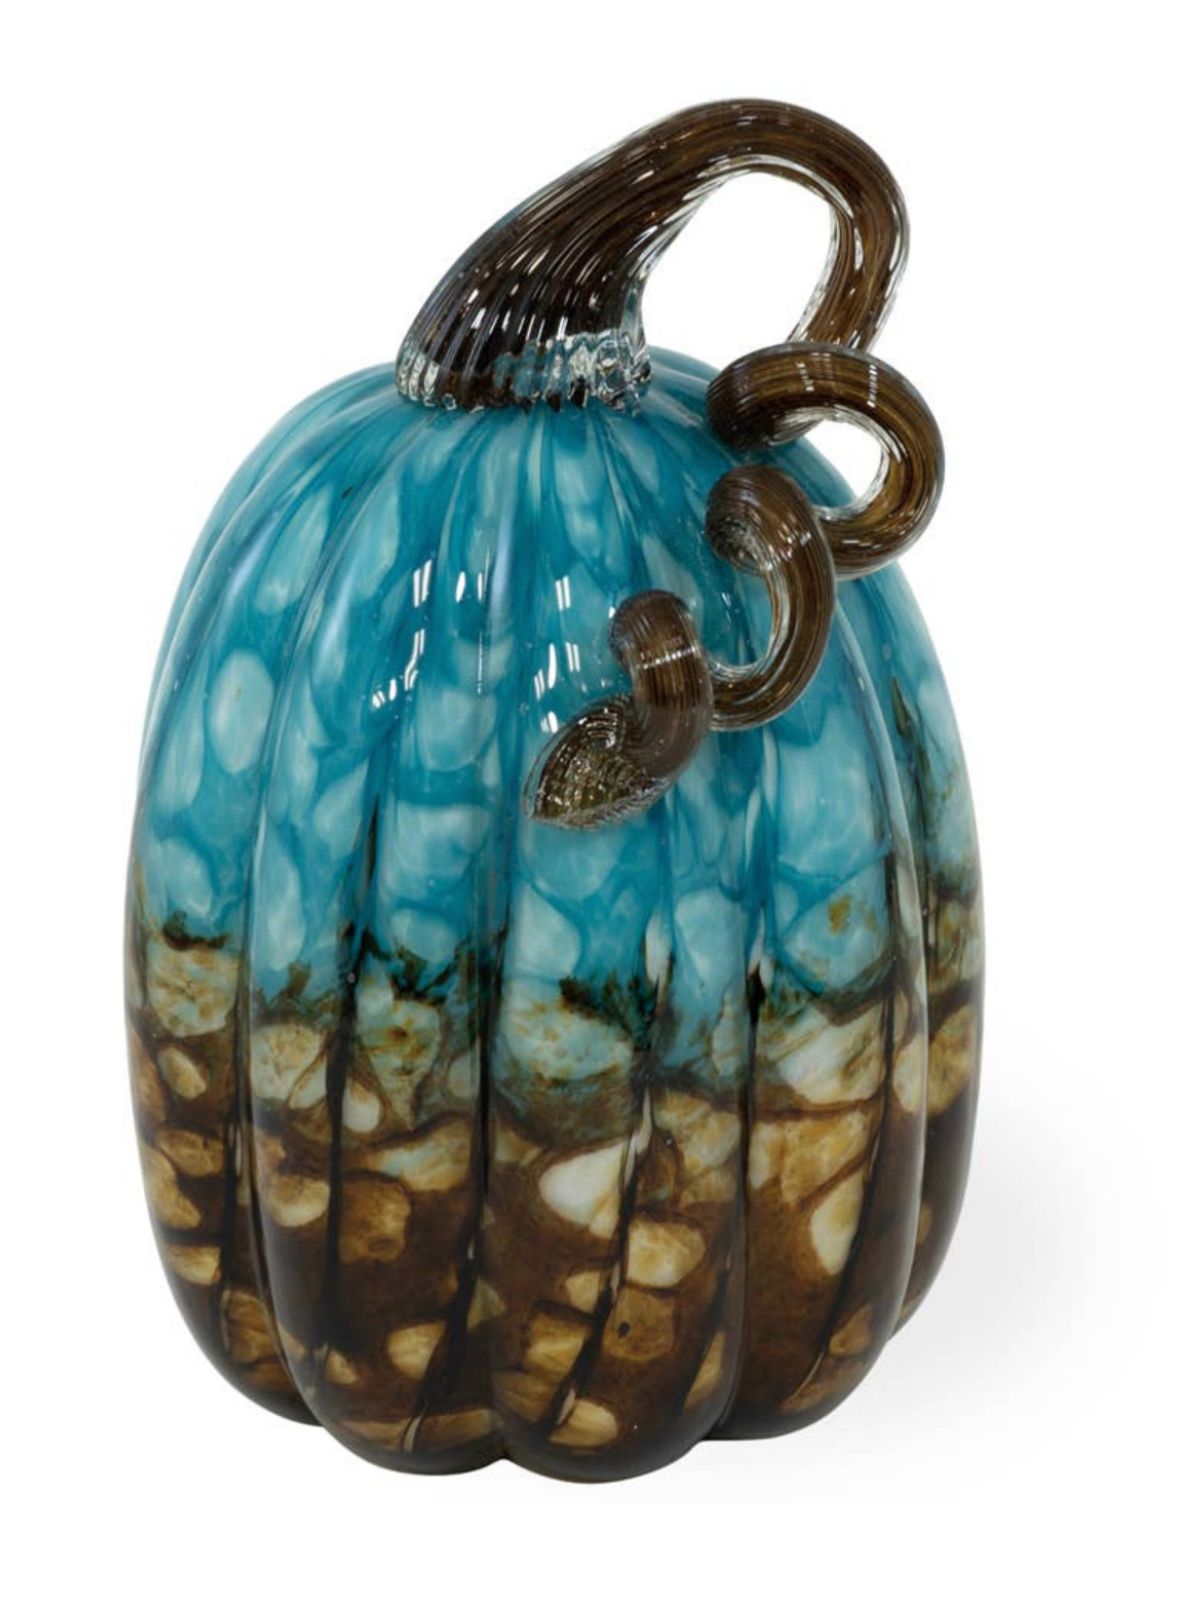 This Tall Copper Canyon Glass Harvest Pumpkin is perfect for bringing decorative beauty to your home. Hand-blown pumpkin displays shades of green and blue and features an accenting textured twisted glass stem on top.